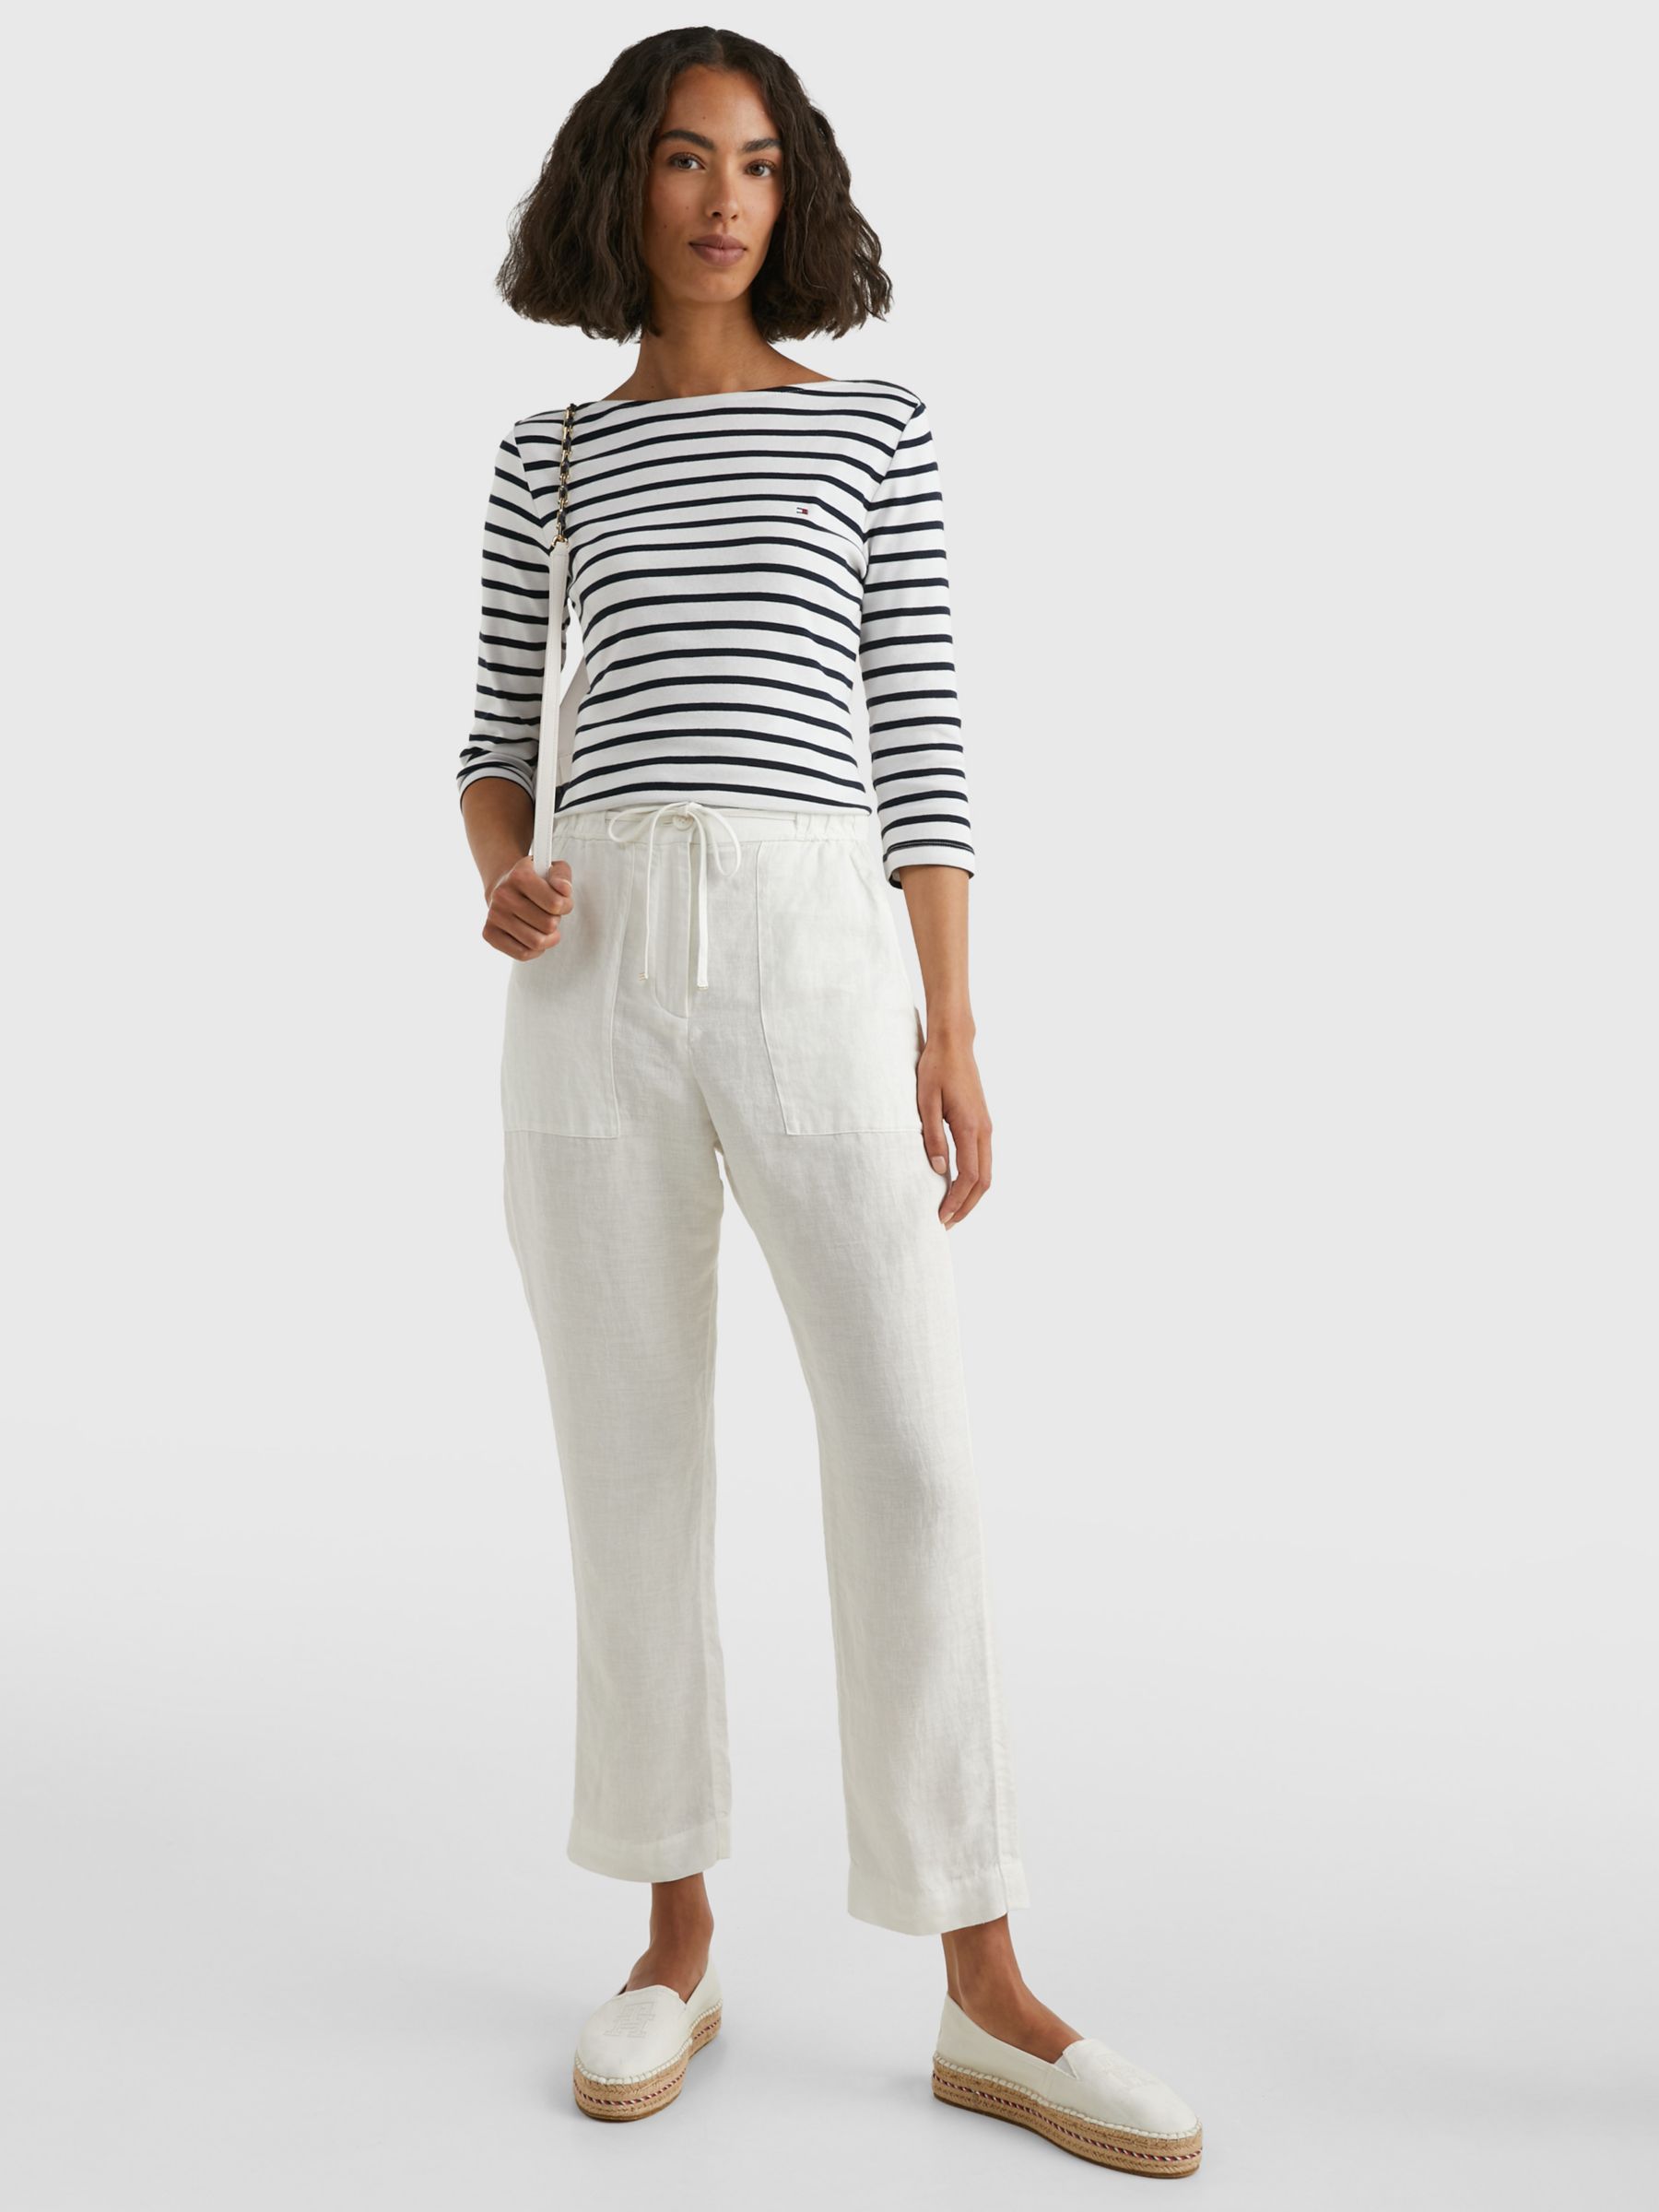 Tommy Hilfiger Linen Pull On Trousers, Ecru at John Lewis & Partners